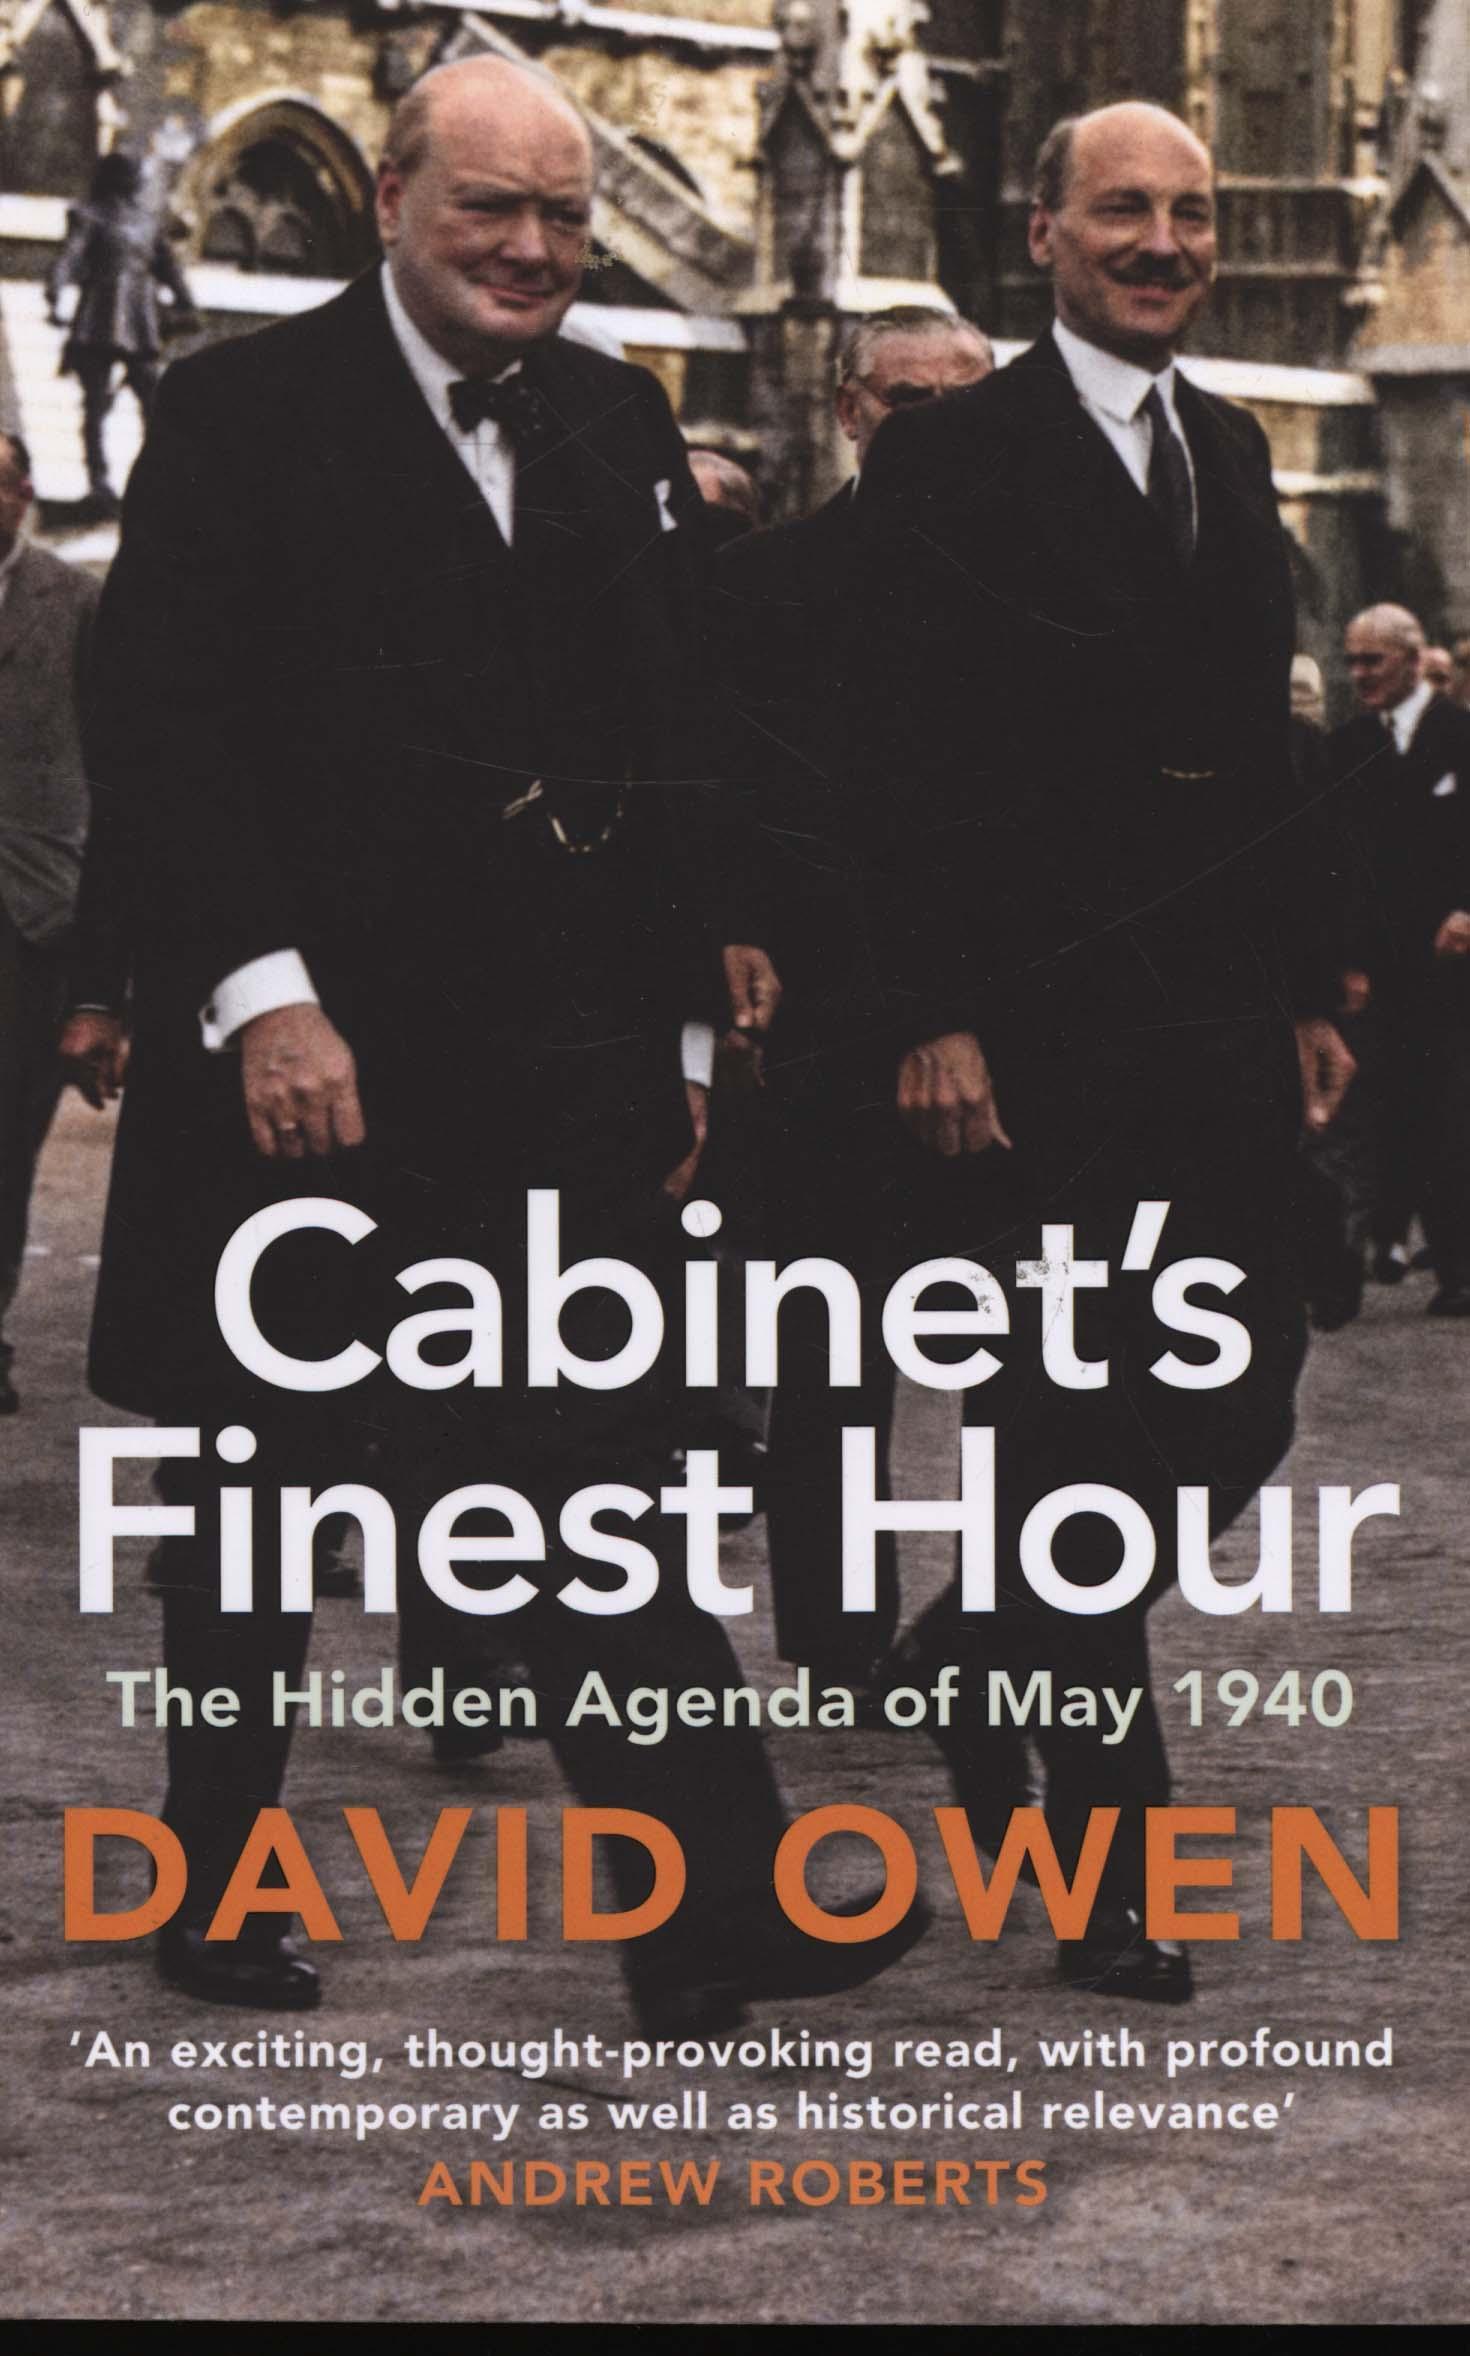 Cabinet's Finest Hour